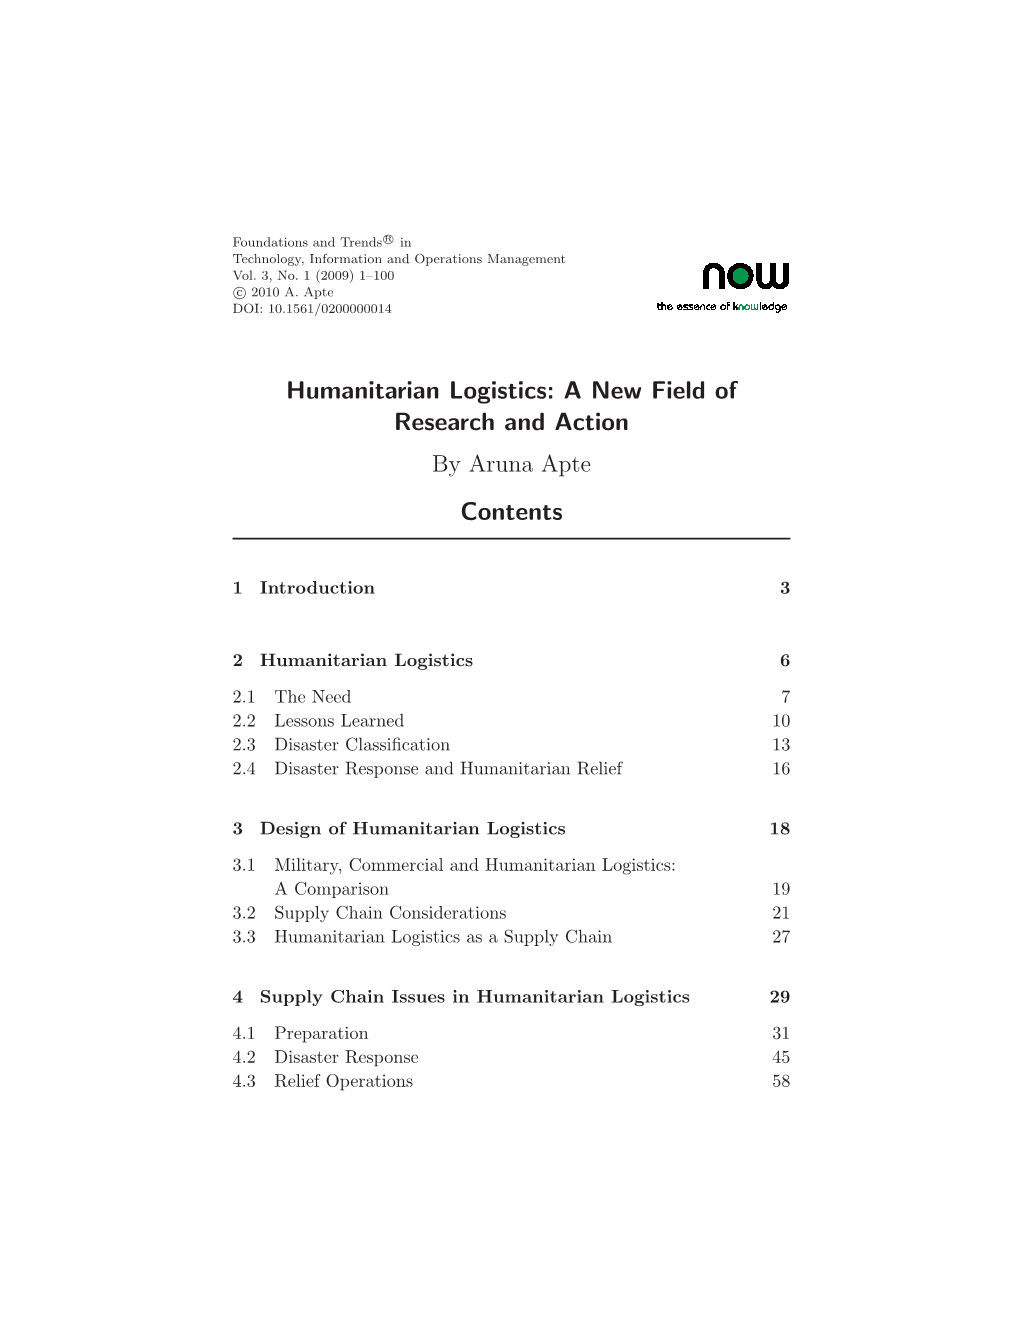 Humanitarian Logistics: a New Field of Research and Action Contents